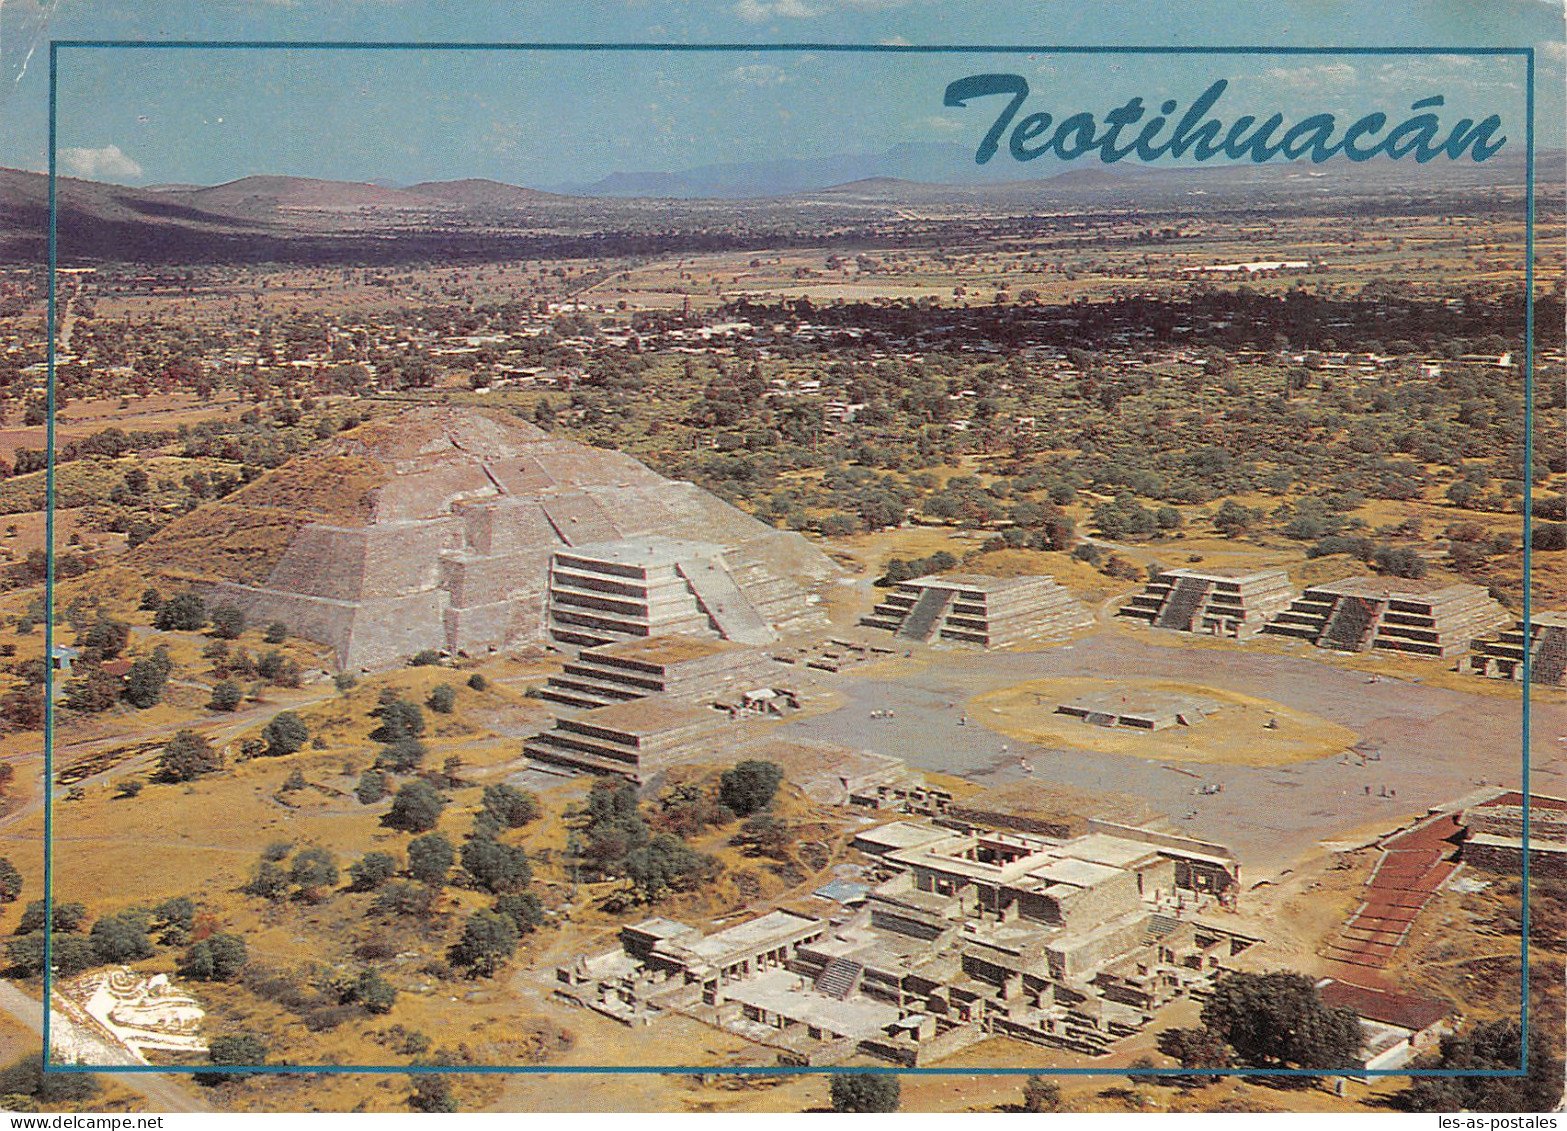 MEXIQUE TEOTIHUACAN - Messico